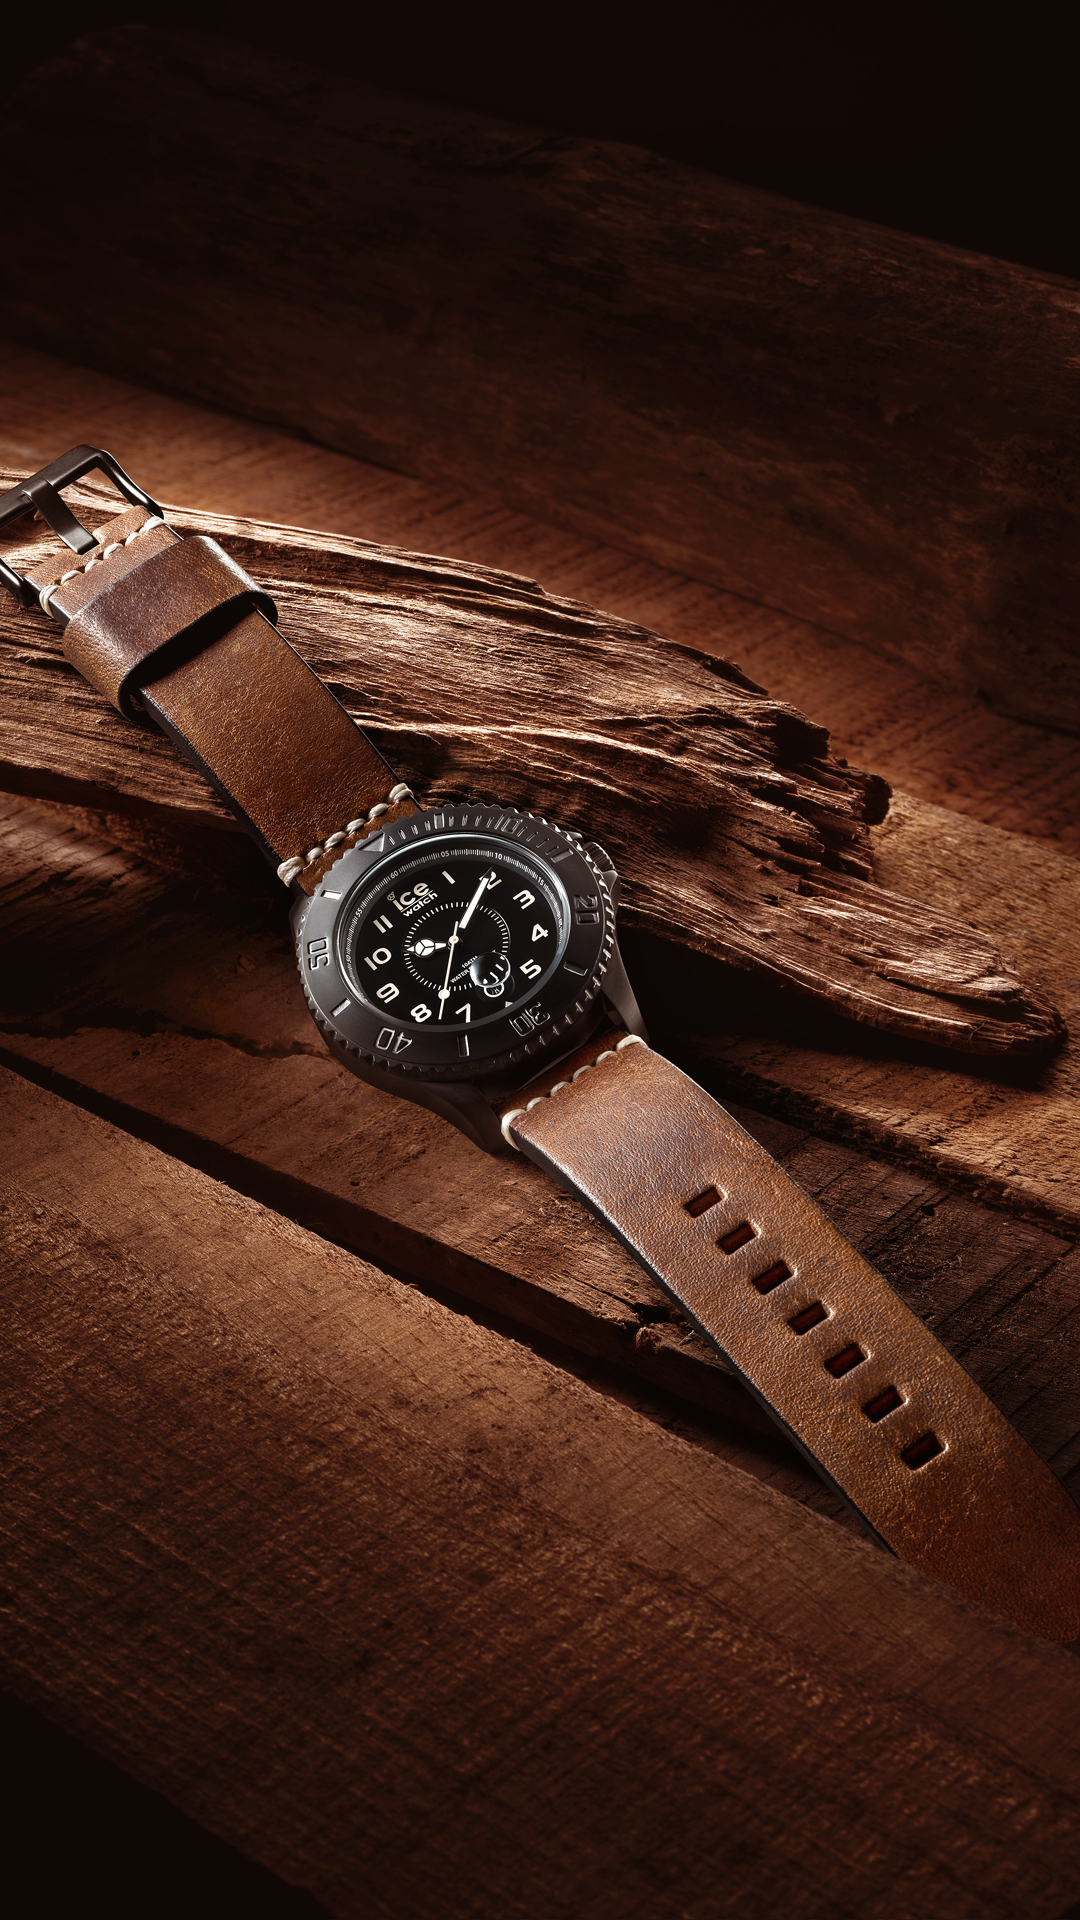  Mobile  Hd  Wallpaper  Black  Watch with Brown Leather Strap 